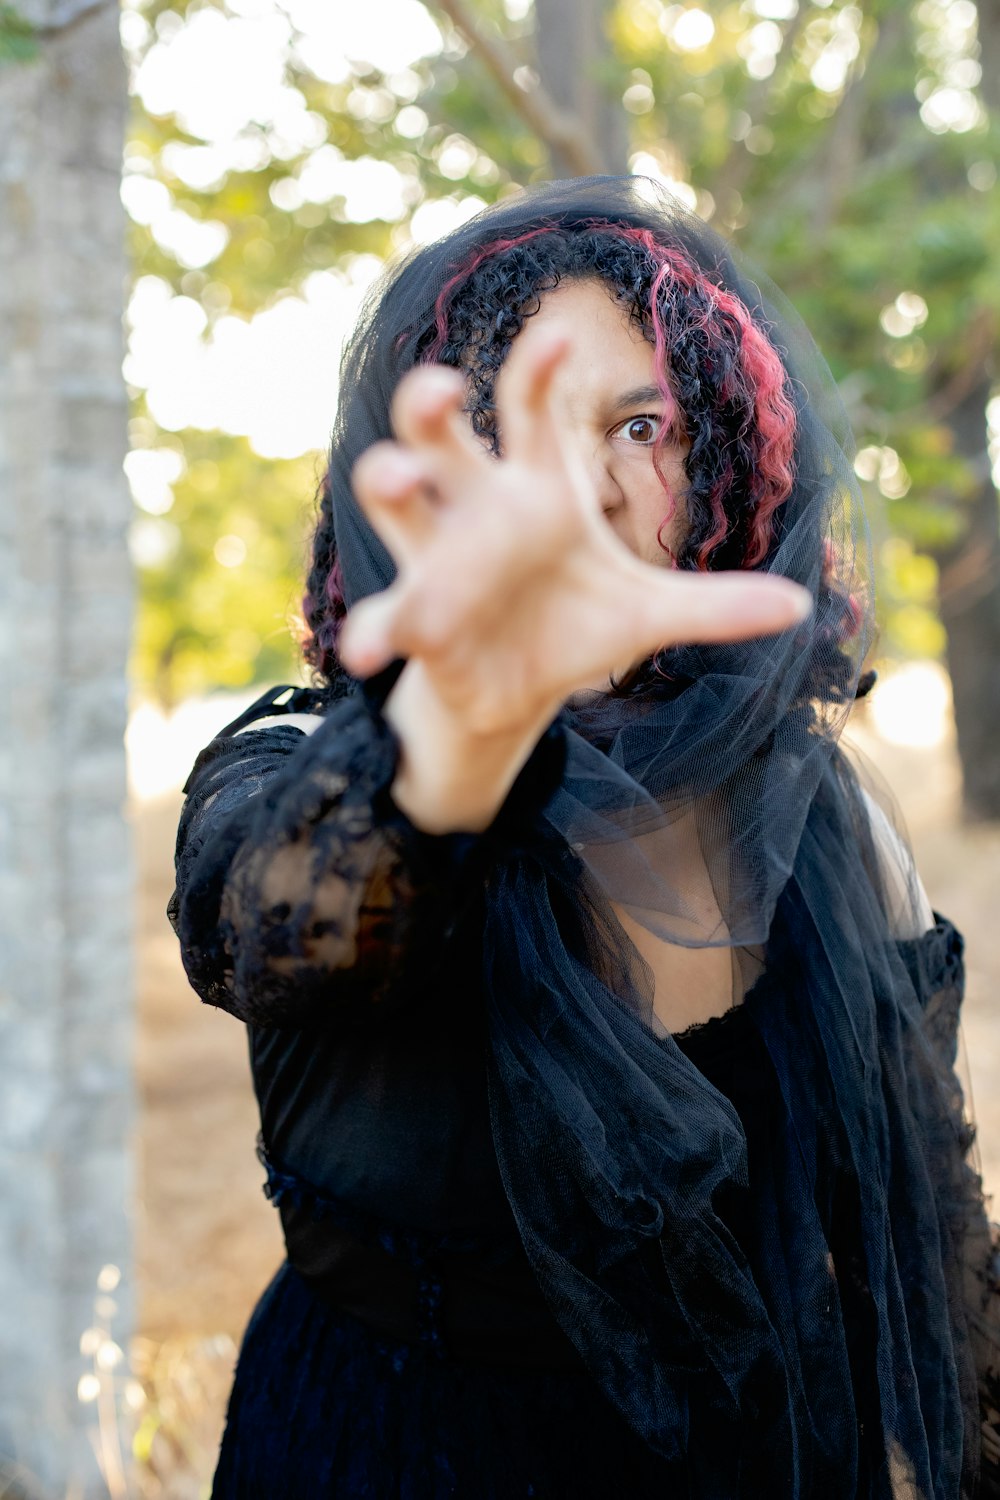 a woman in a black dress making a hand gesture